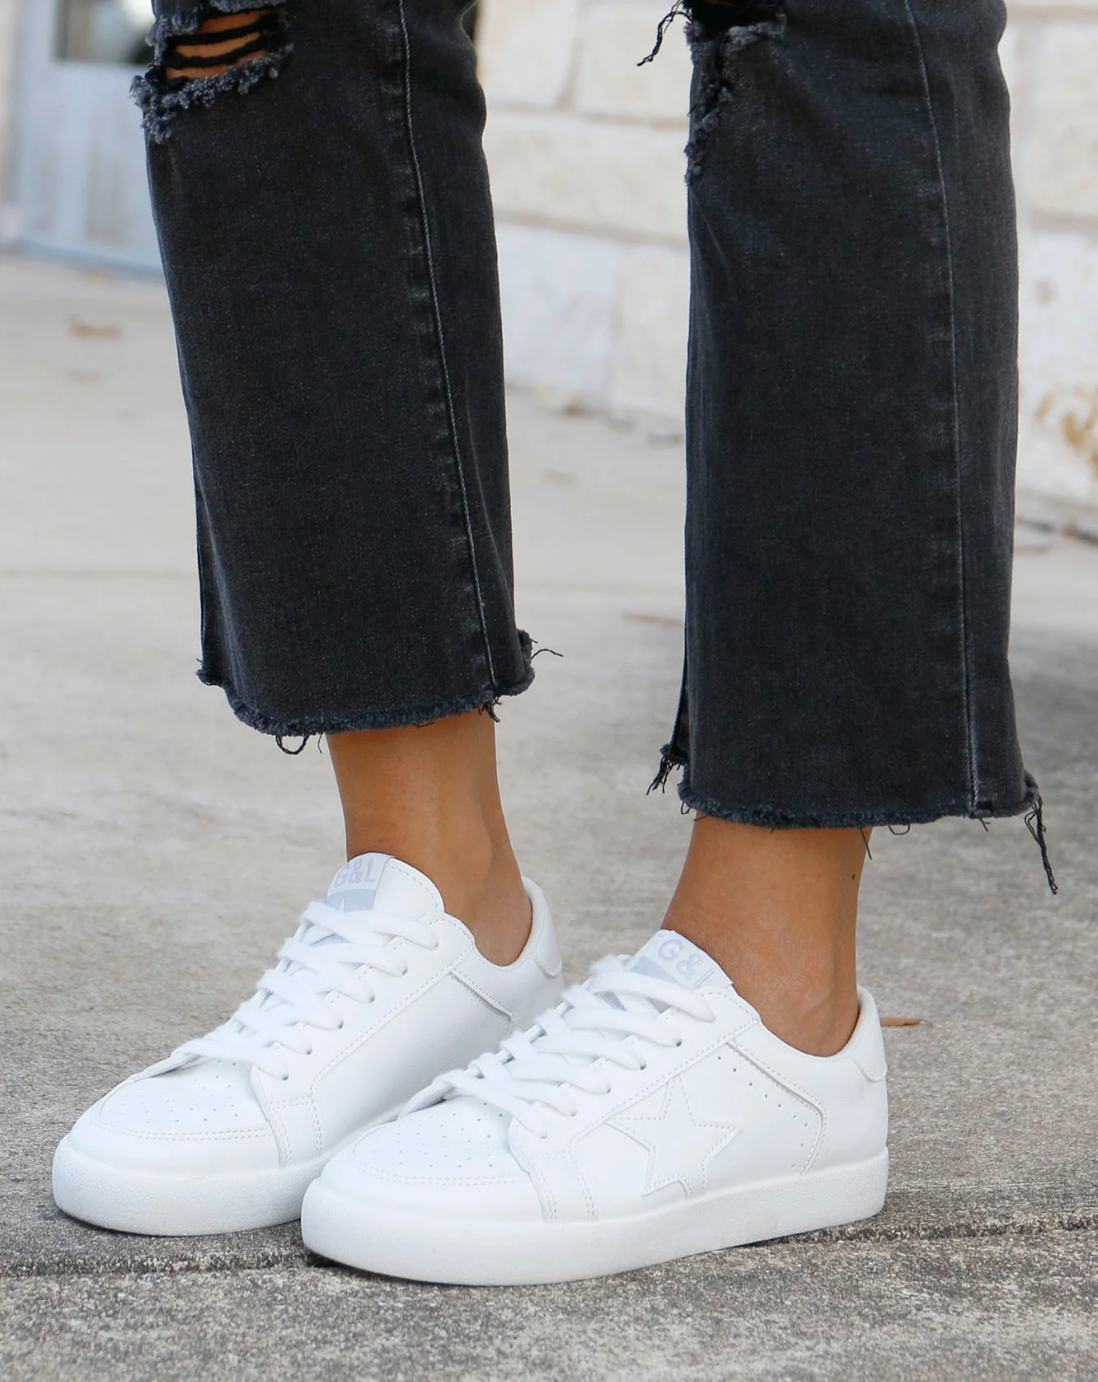 Grace & Lace Star Sneakers - White